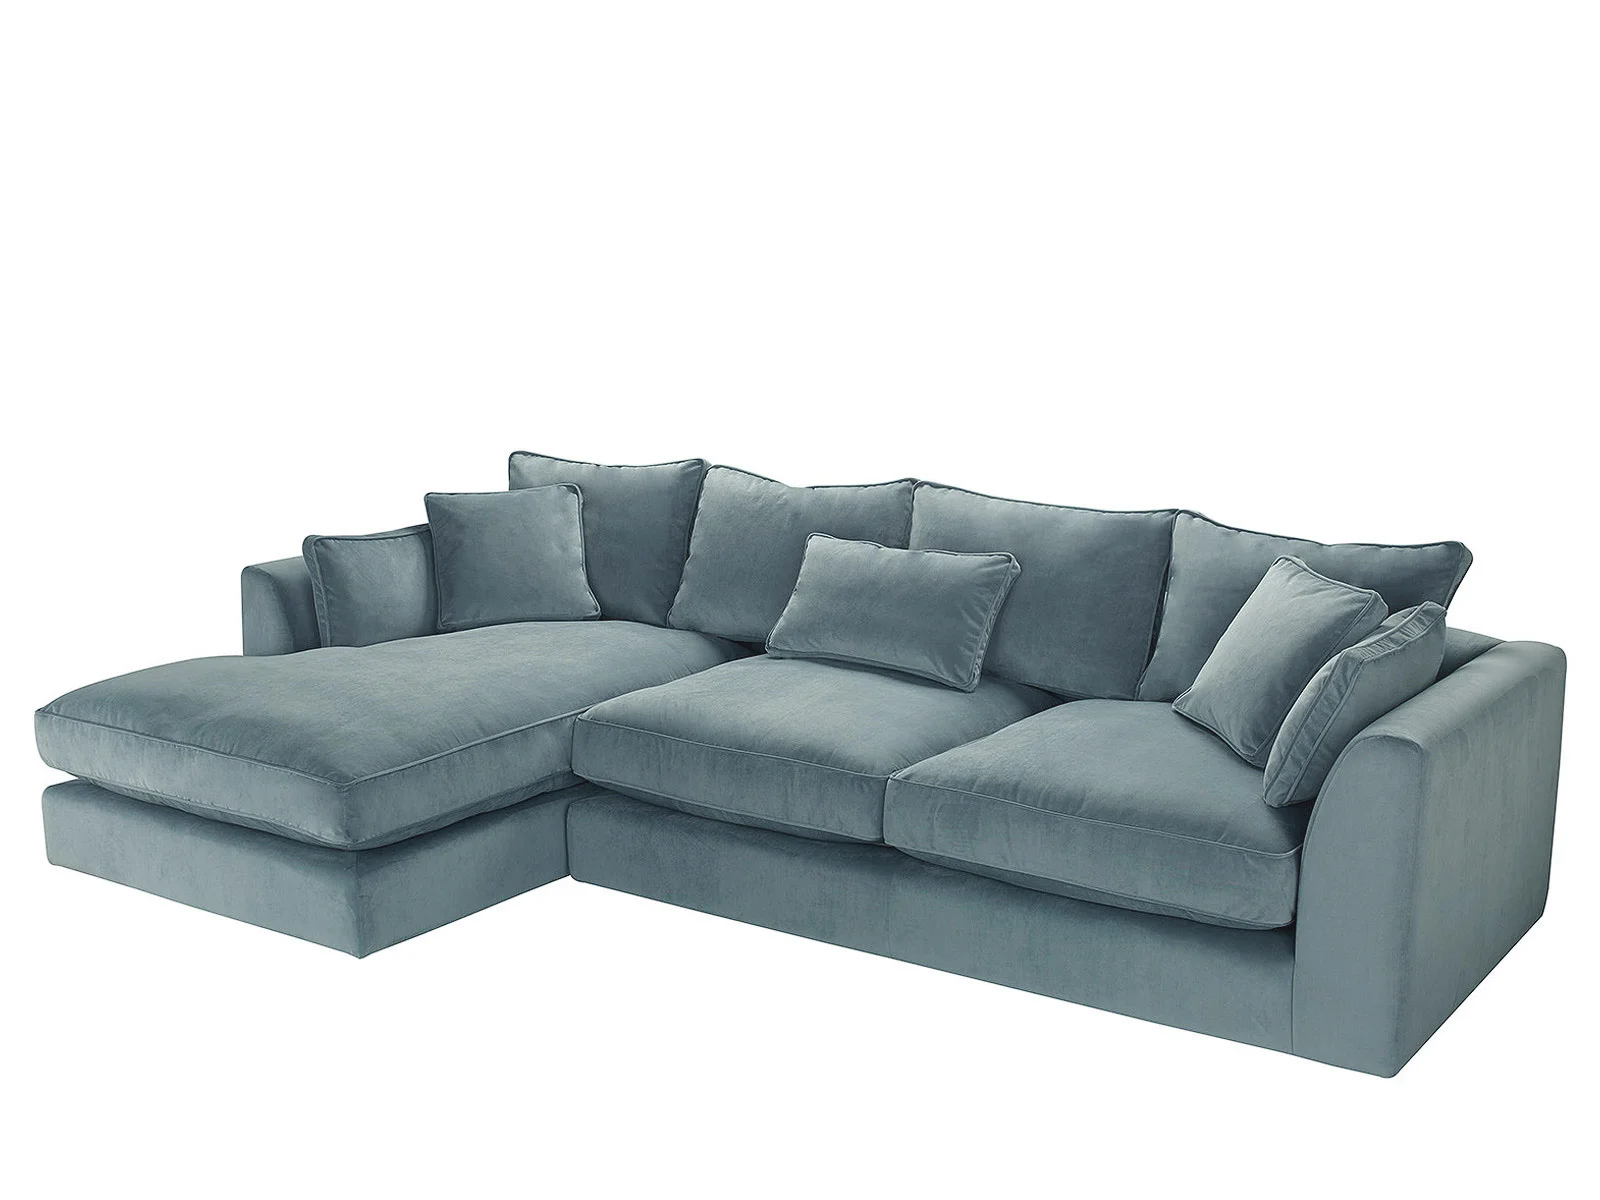 Large Left Hand Facing Chaise Sofa